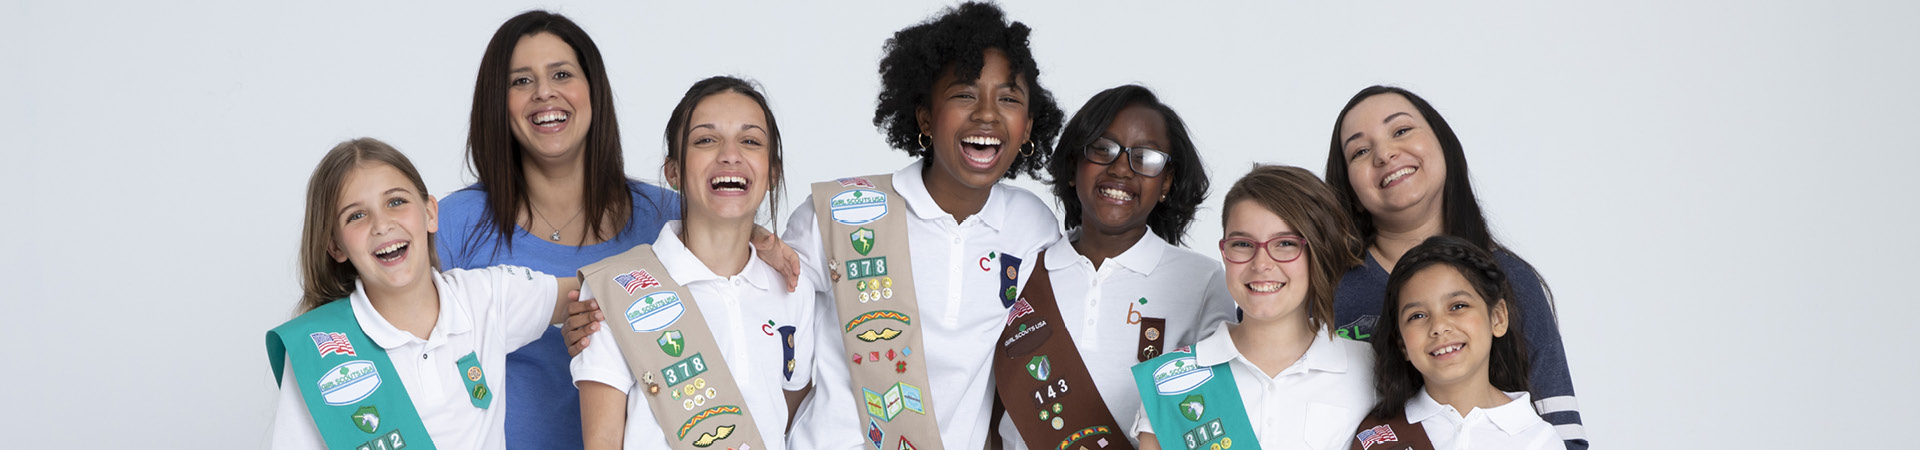  A diverse group of Girl Scouts smiling with two leaders 